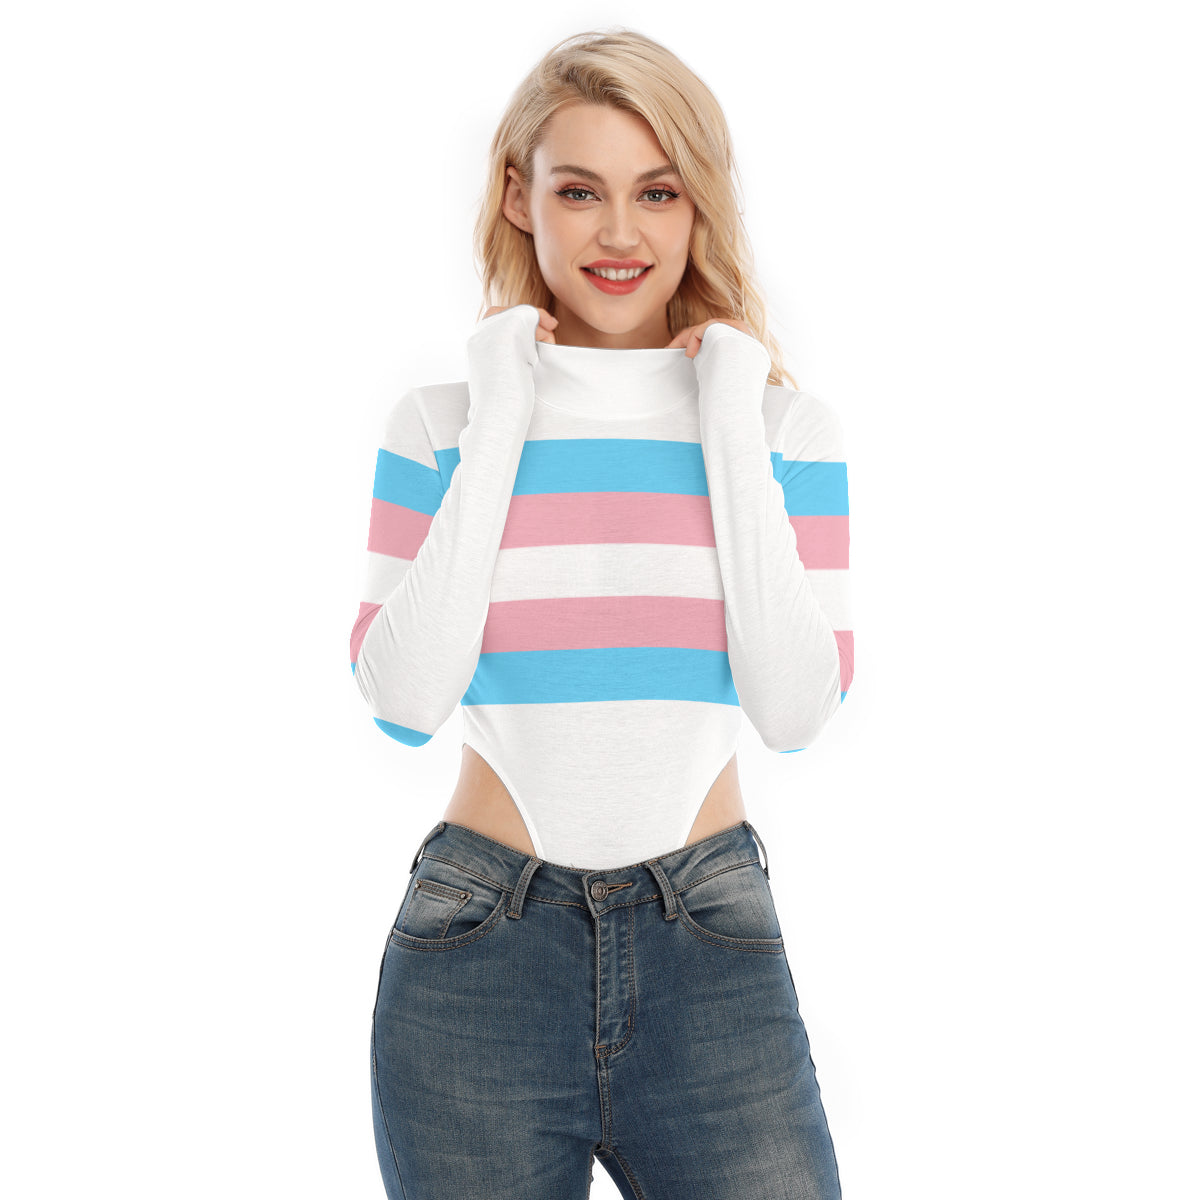 Teen All Over Blue Pink White Pride Long-Sleeve Body